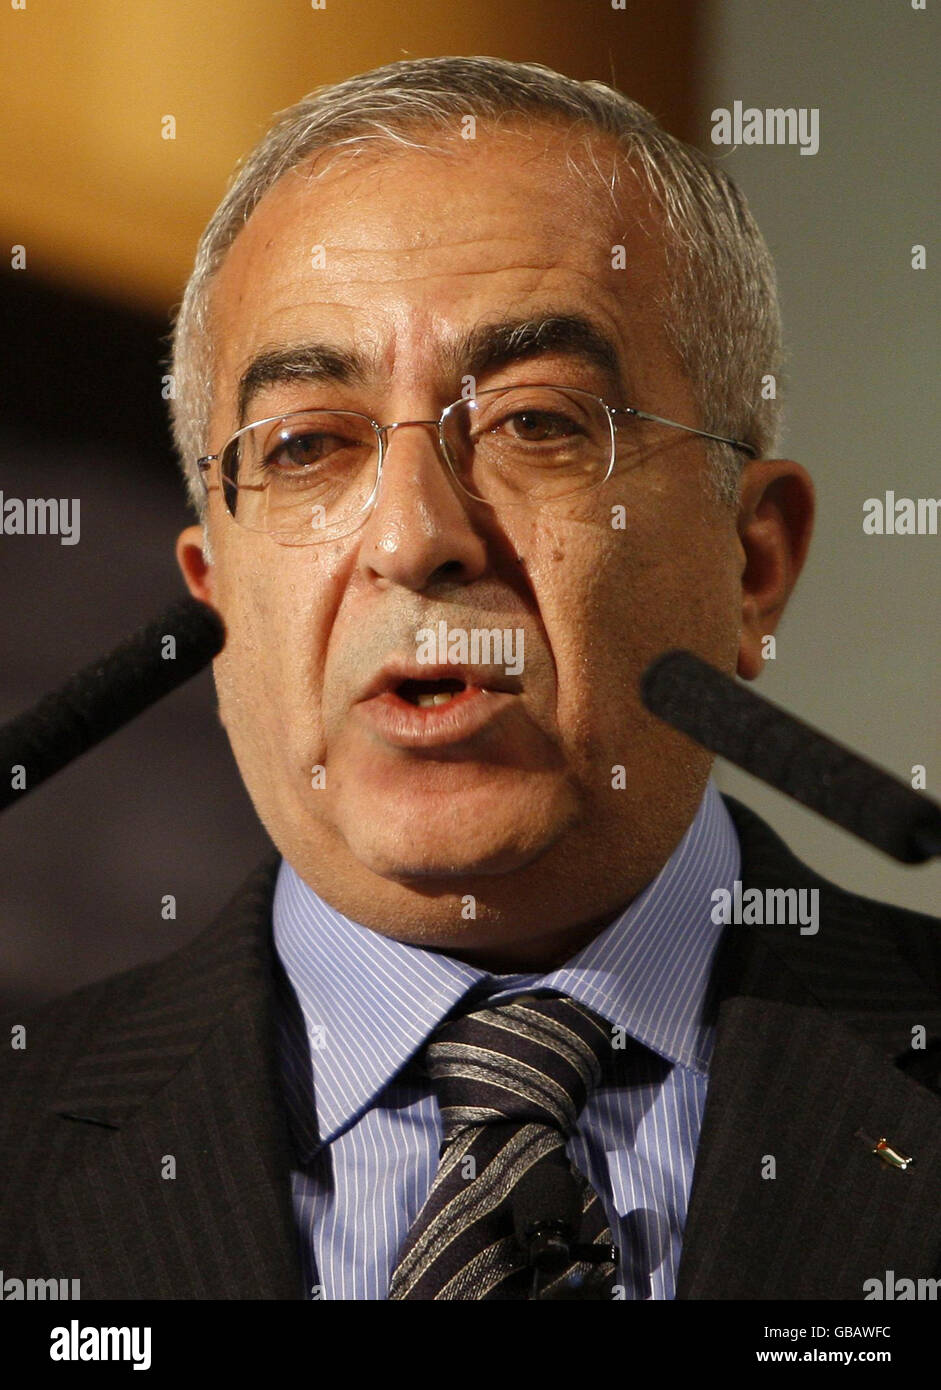 Palestinian Prime Minister Salam Fayyad gives a speech at the Palestinian Investment Conference in London. Stock Photo